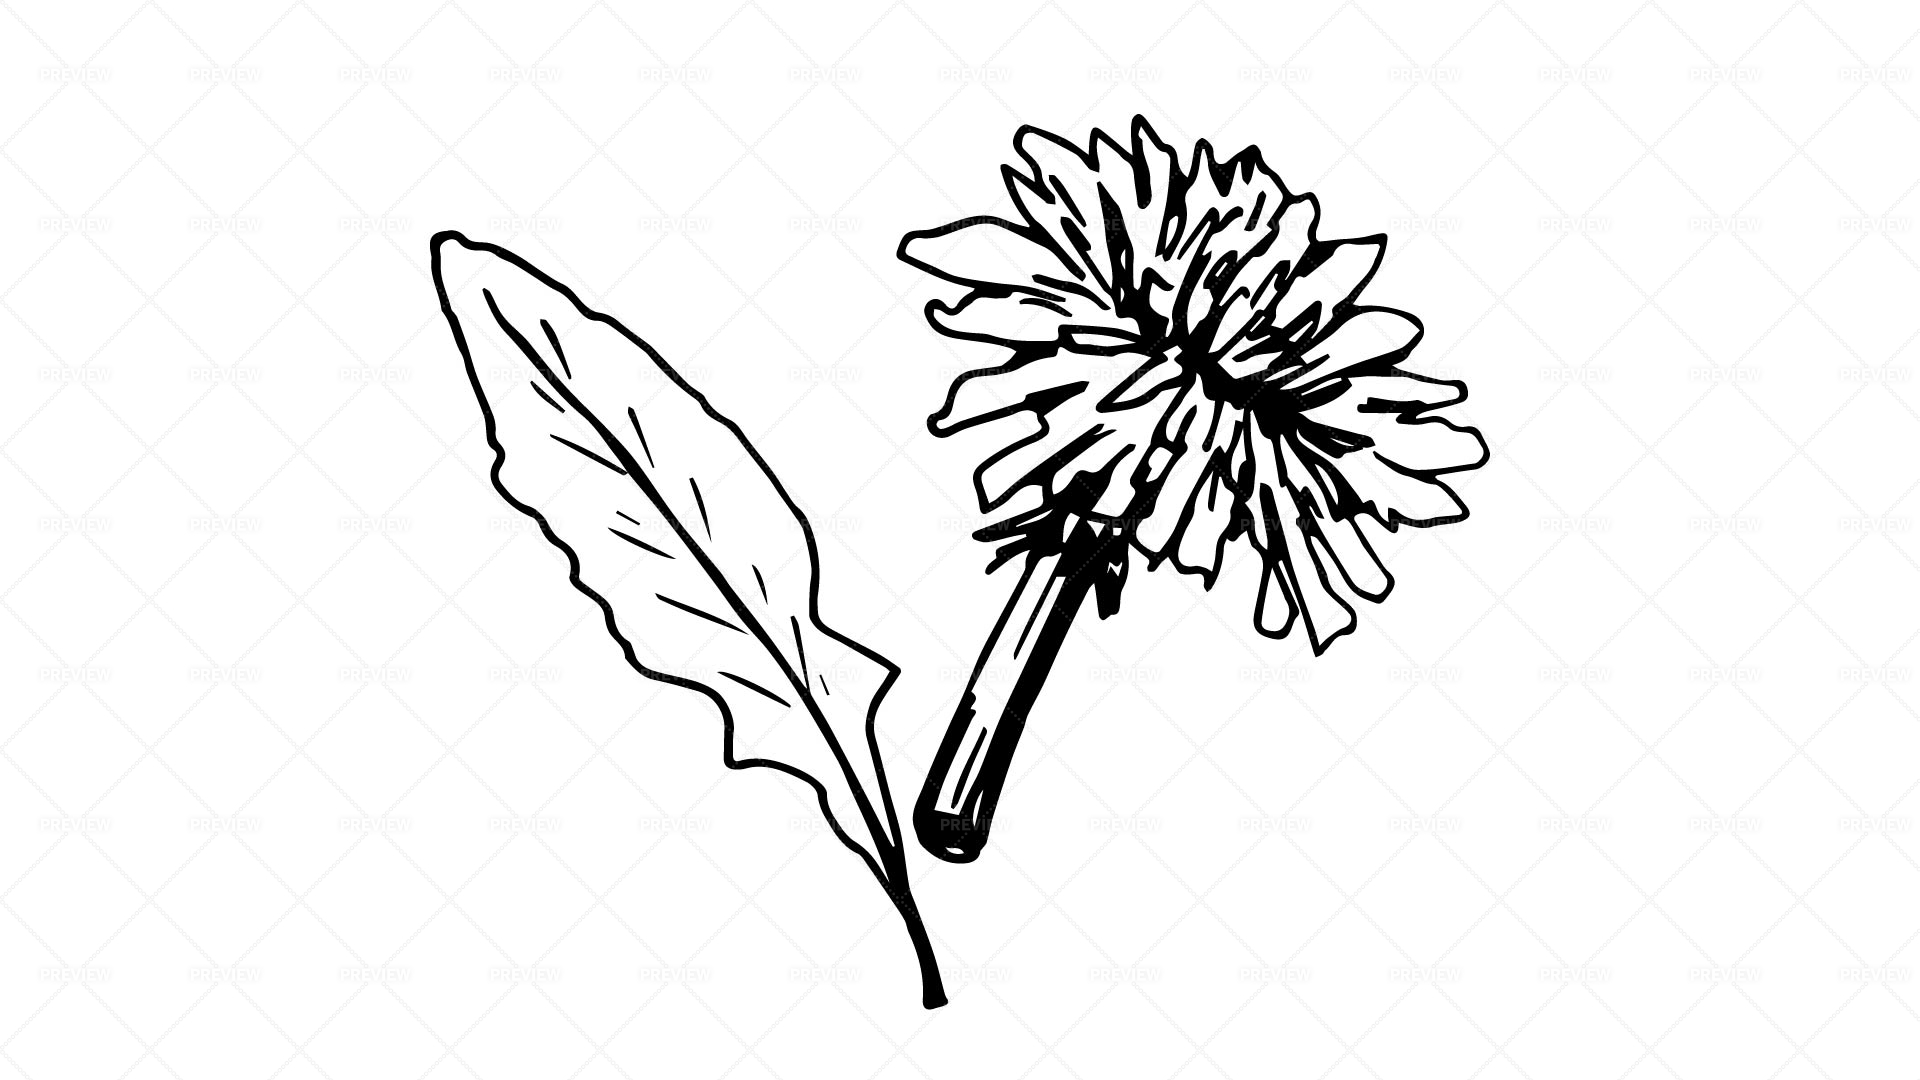 Dandelion flower vector drawing set isolated wild plant and flying seeds  herbal engraved style illustration detailed  CanStock